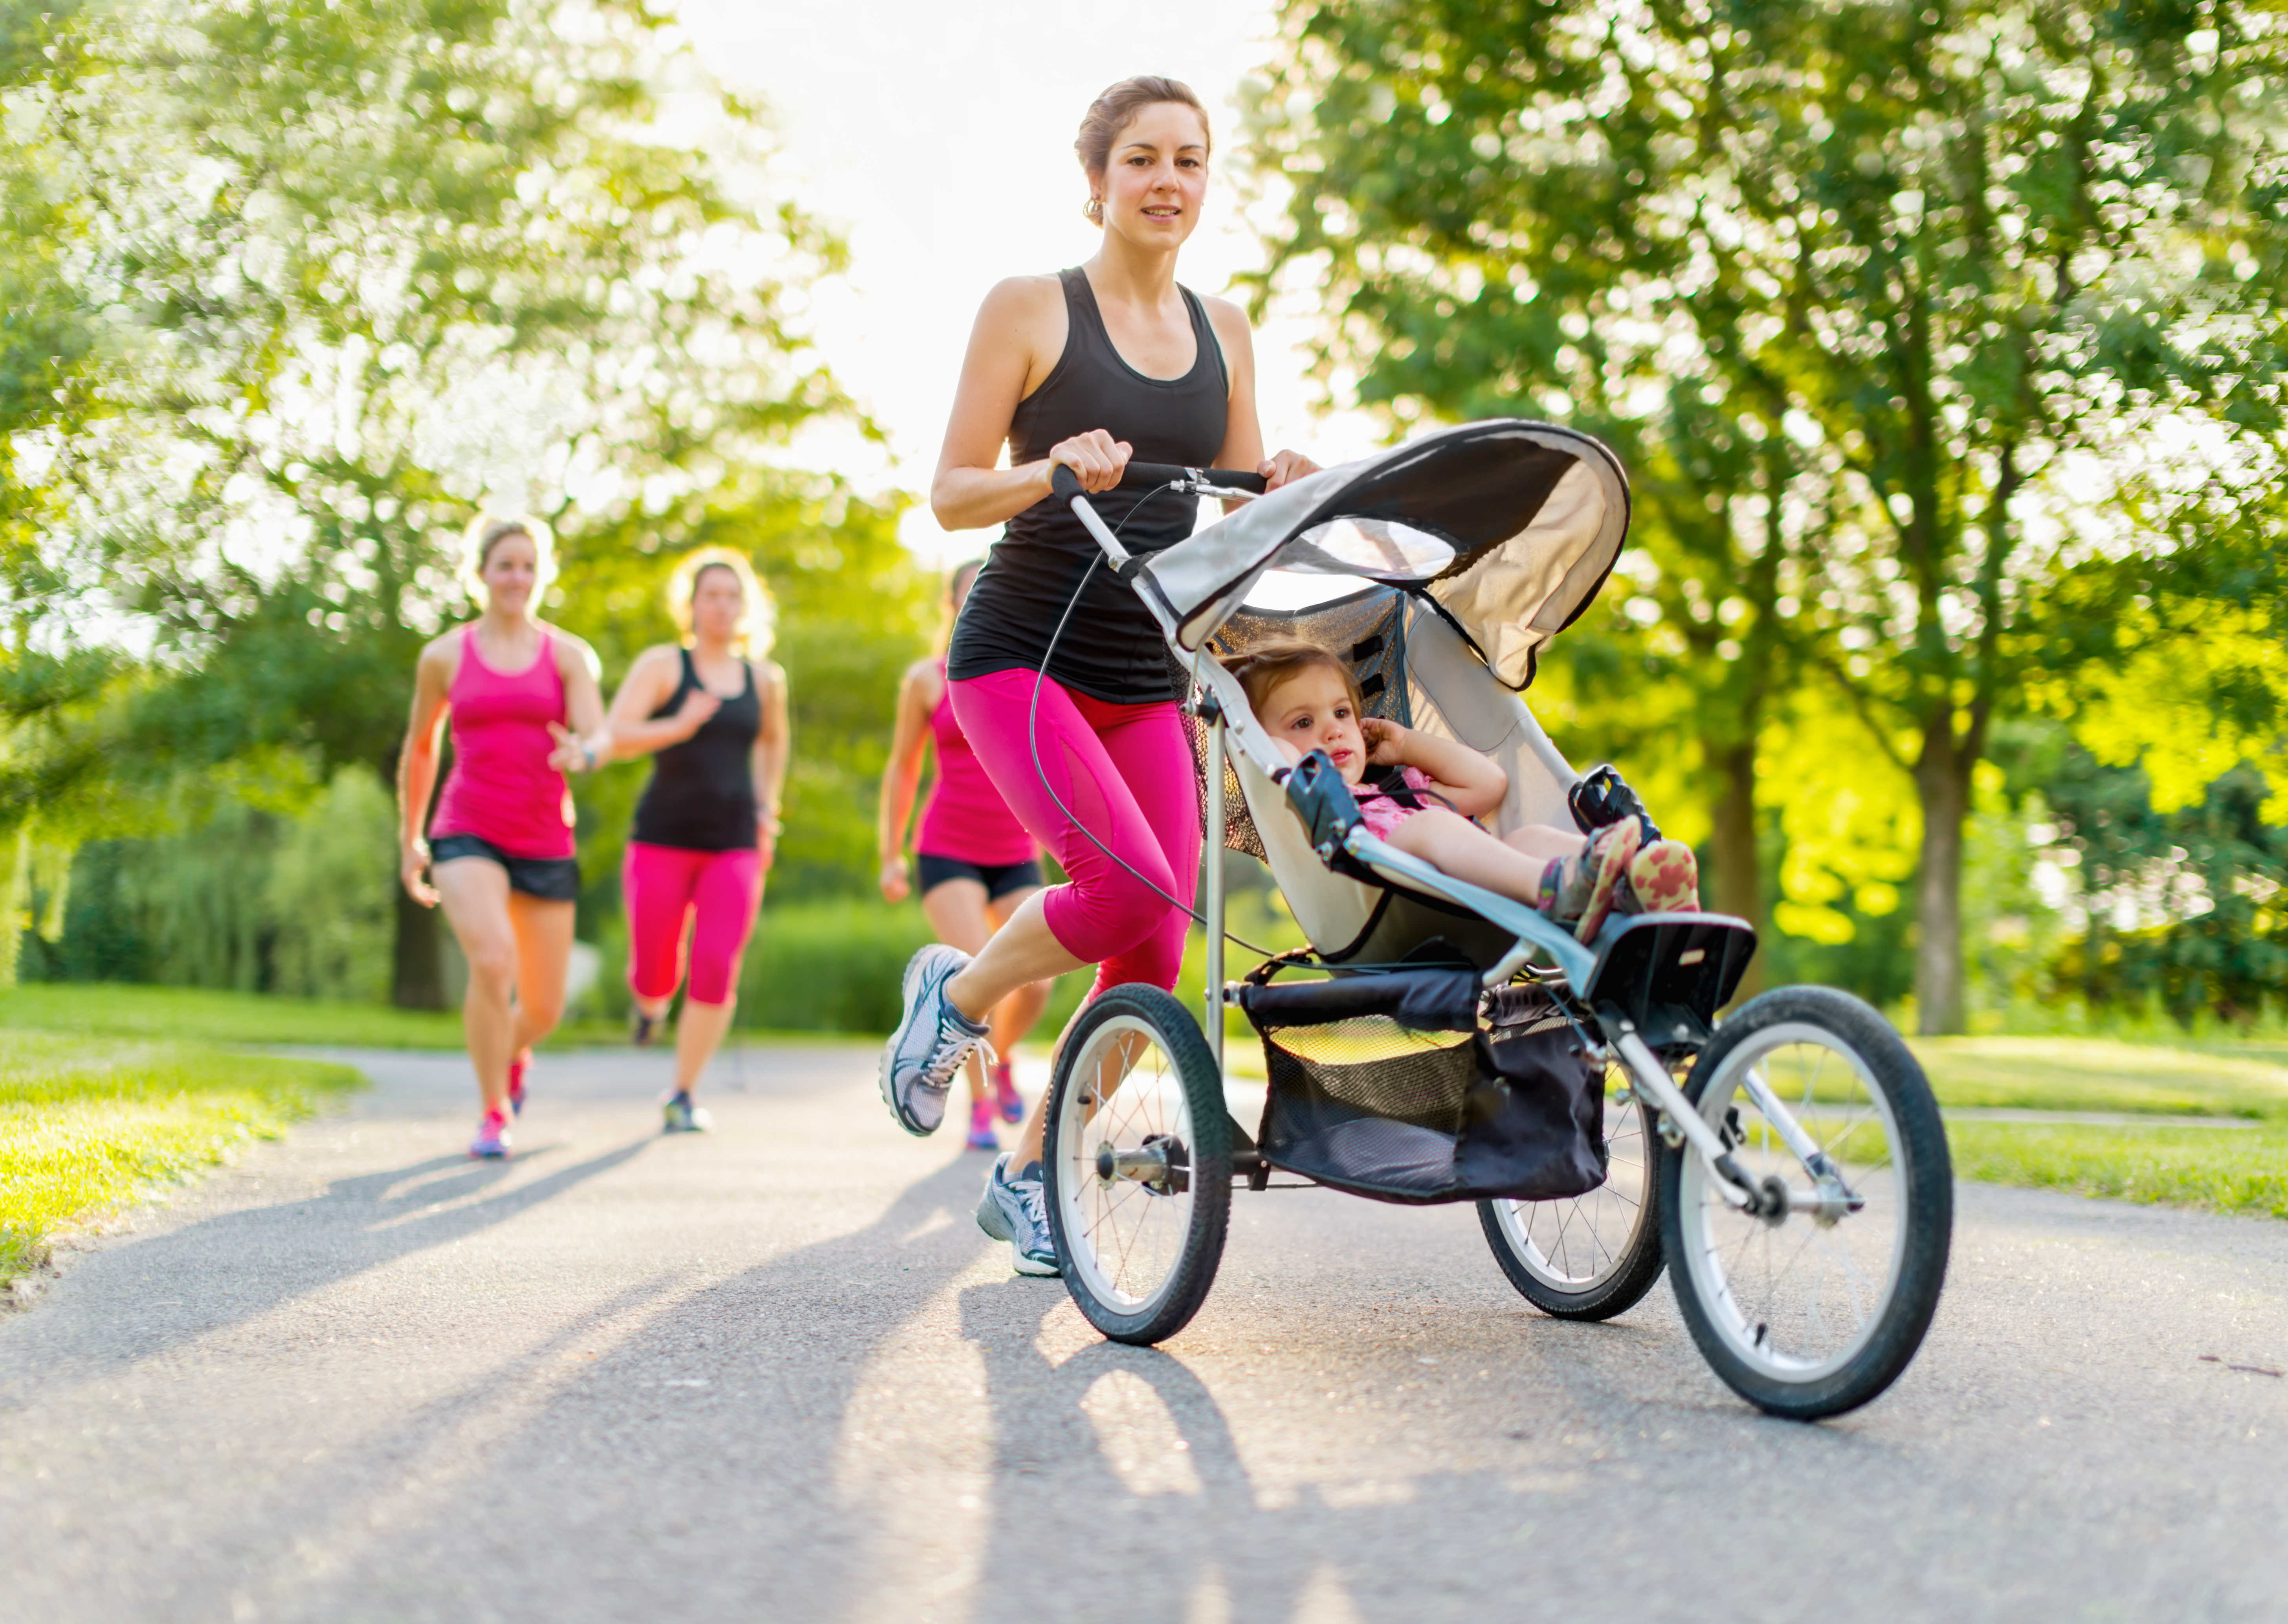 Entertaining And Fun Solutions Turn Your Baby’s Stroller Into A Fitness Machine